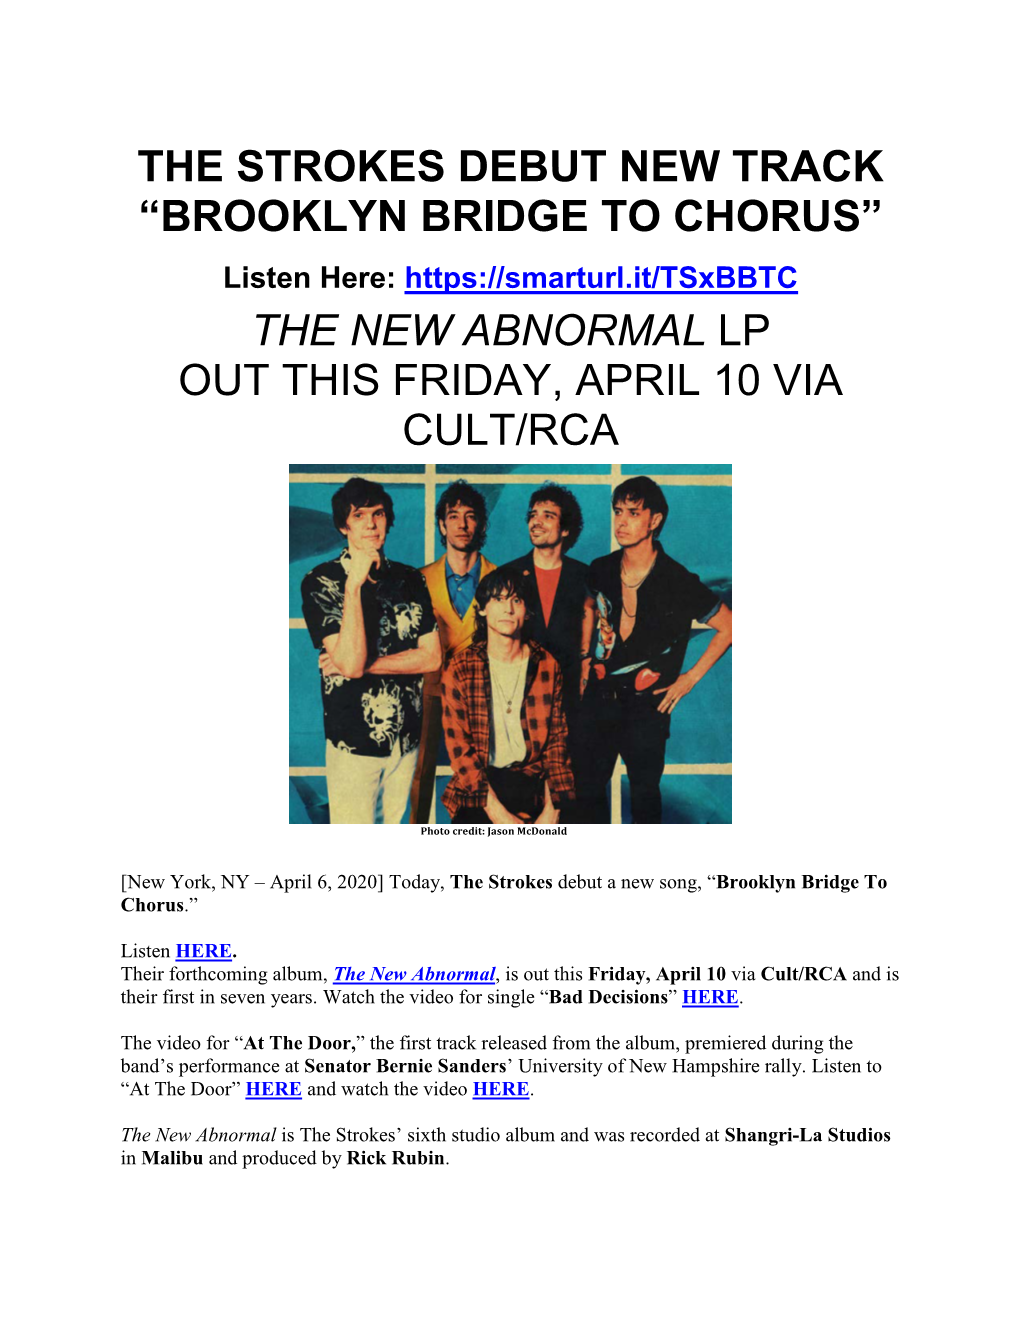 THE STROKES DEBUT NEW TRACK “BROOKLYN BRIDGE to CHORUS” Listen Here: the NEW ABNORMAL LP out THIS FRIDAY, APRIL 10 VIA CULT/RCA